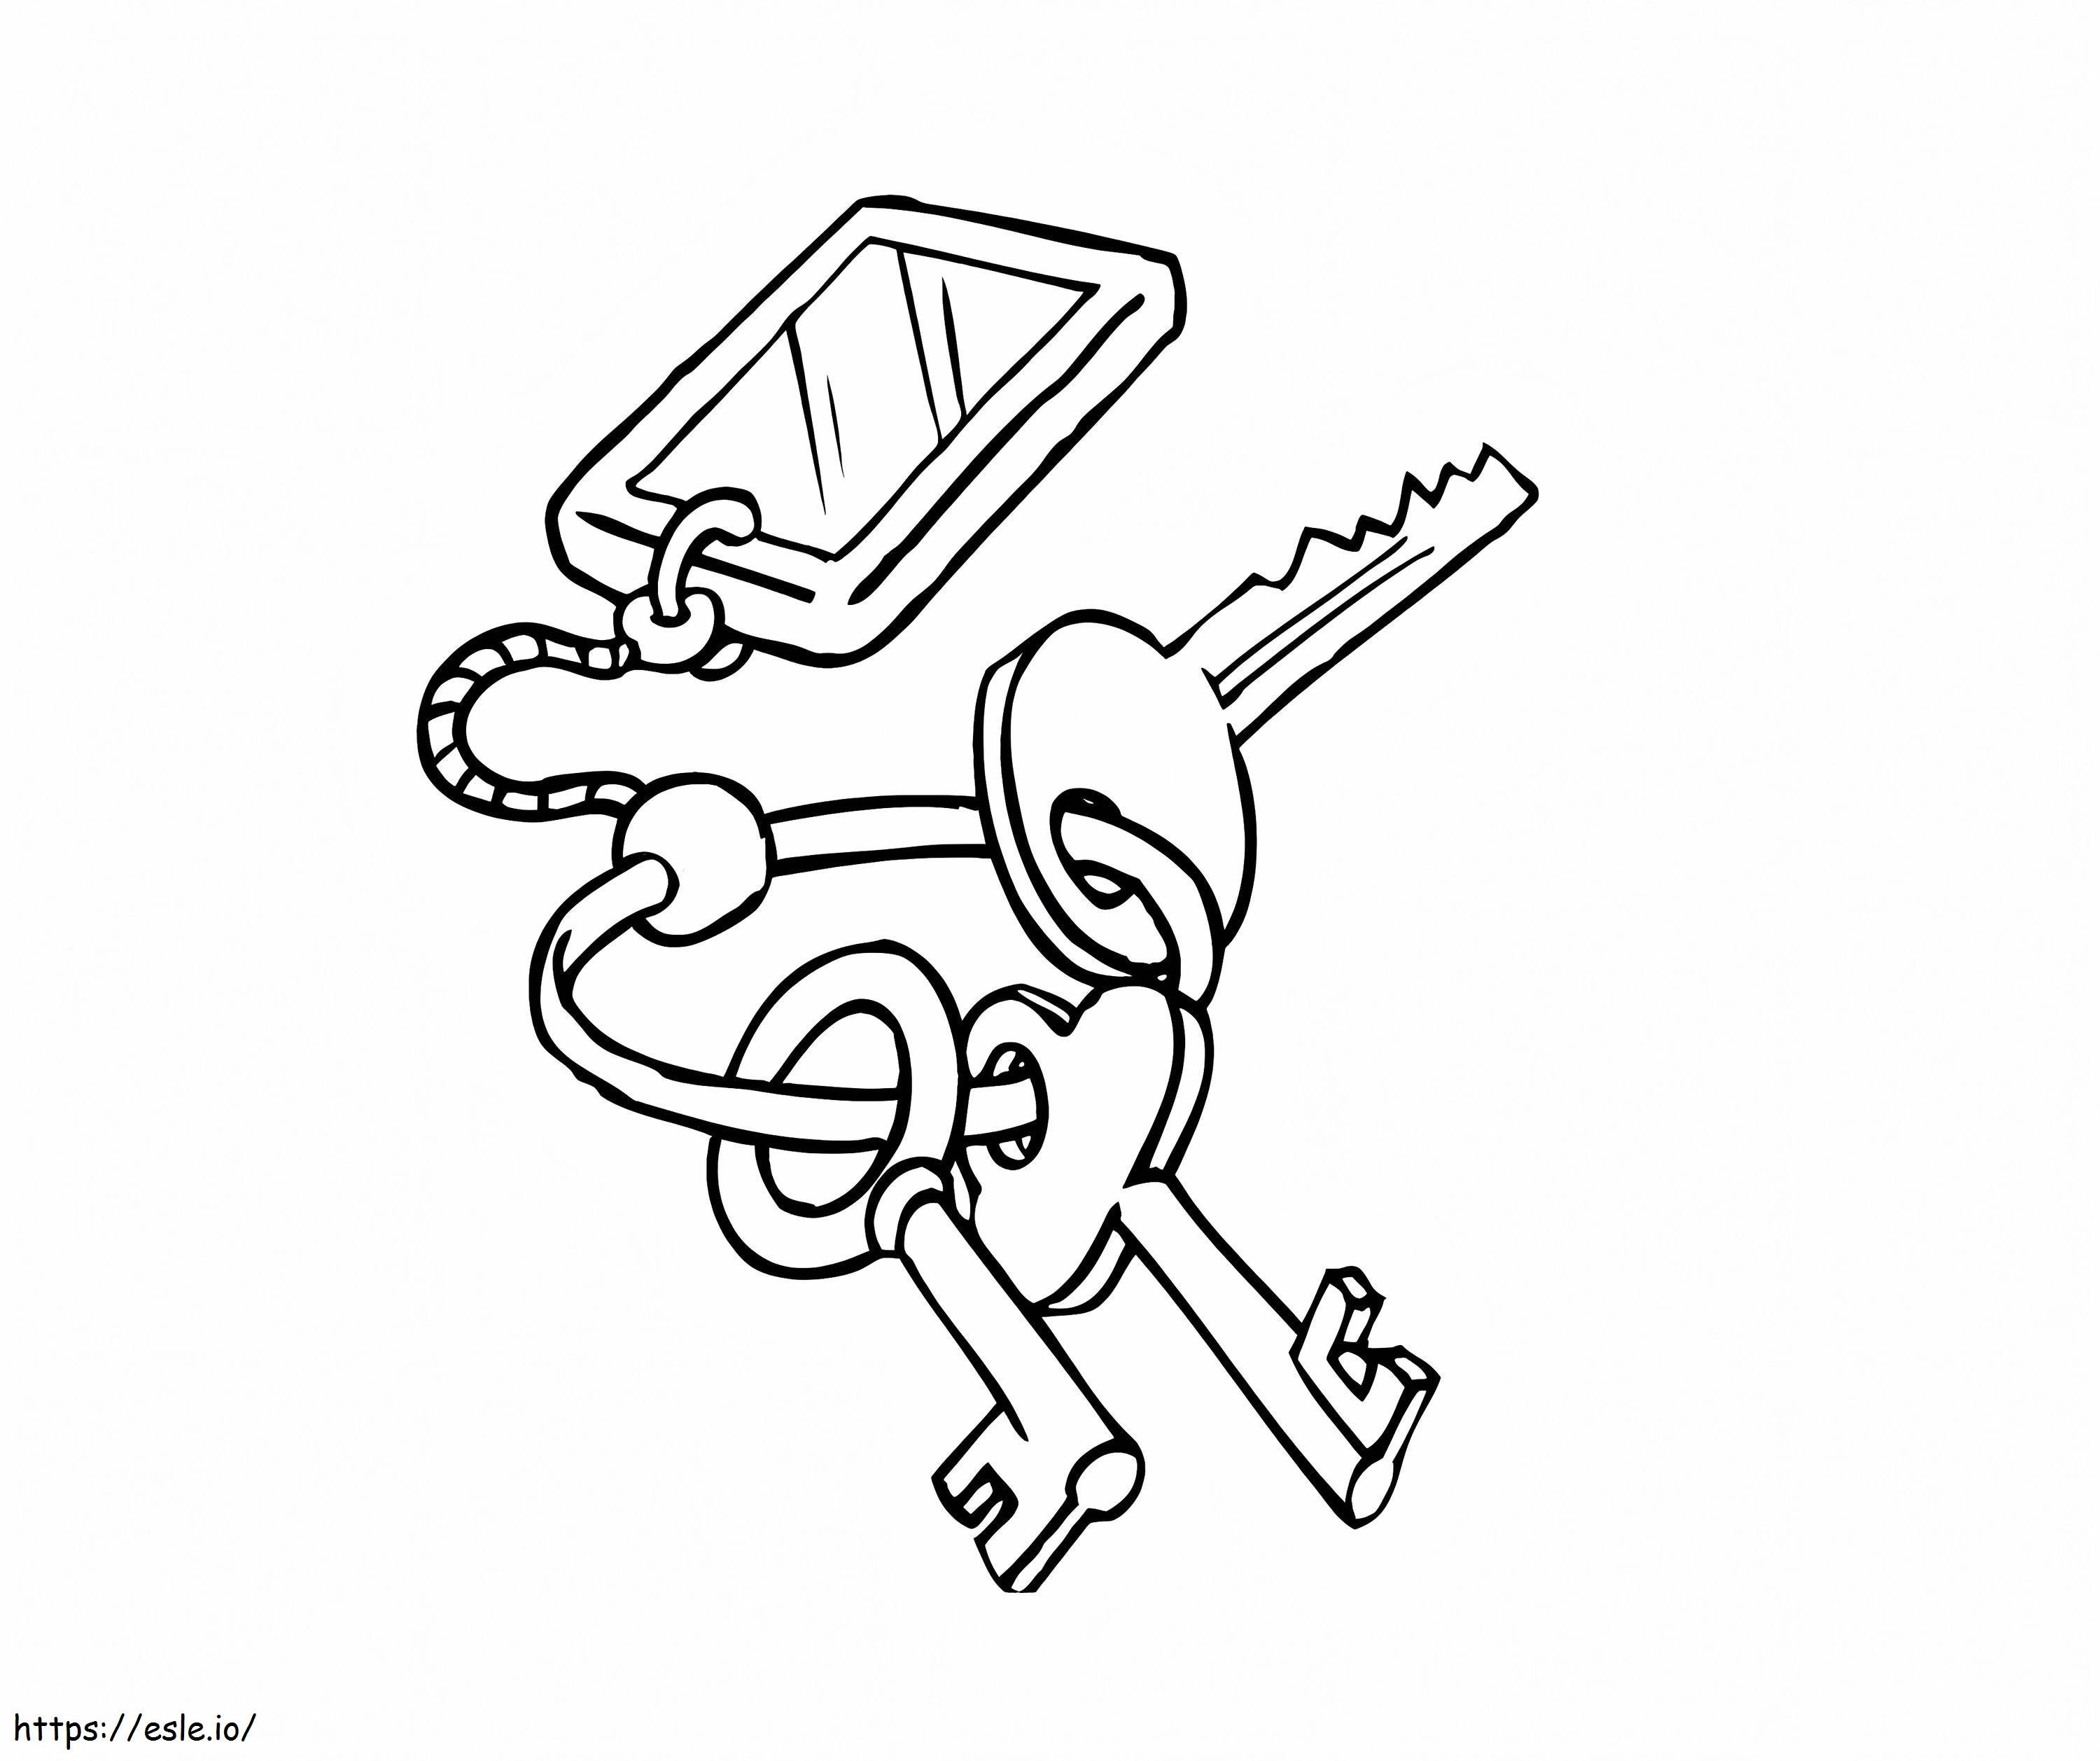 House Keys coloring page